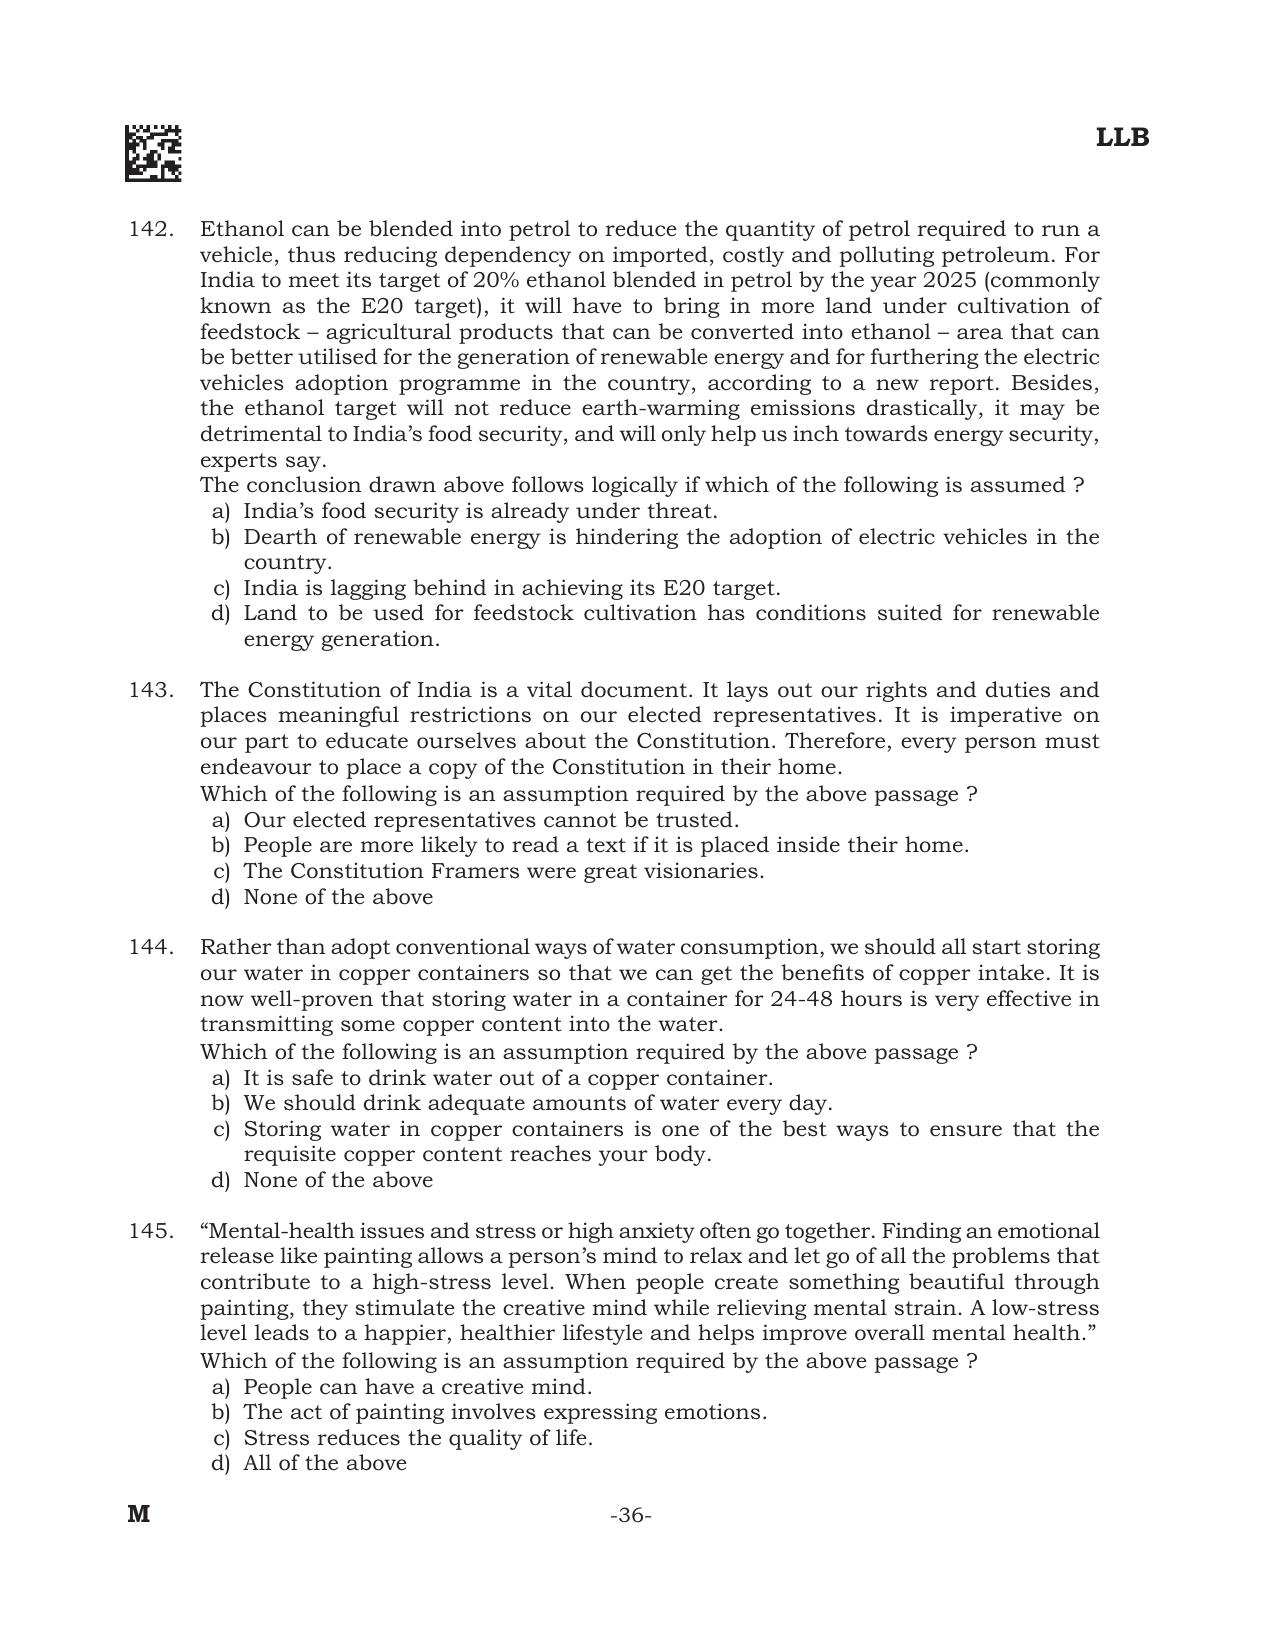 AILET 2022 Question Paper for BA LLB - Page 36